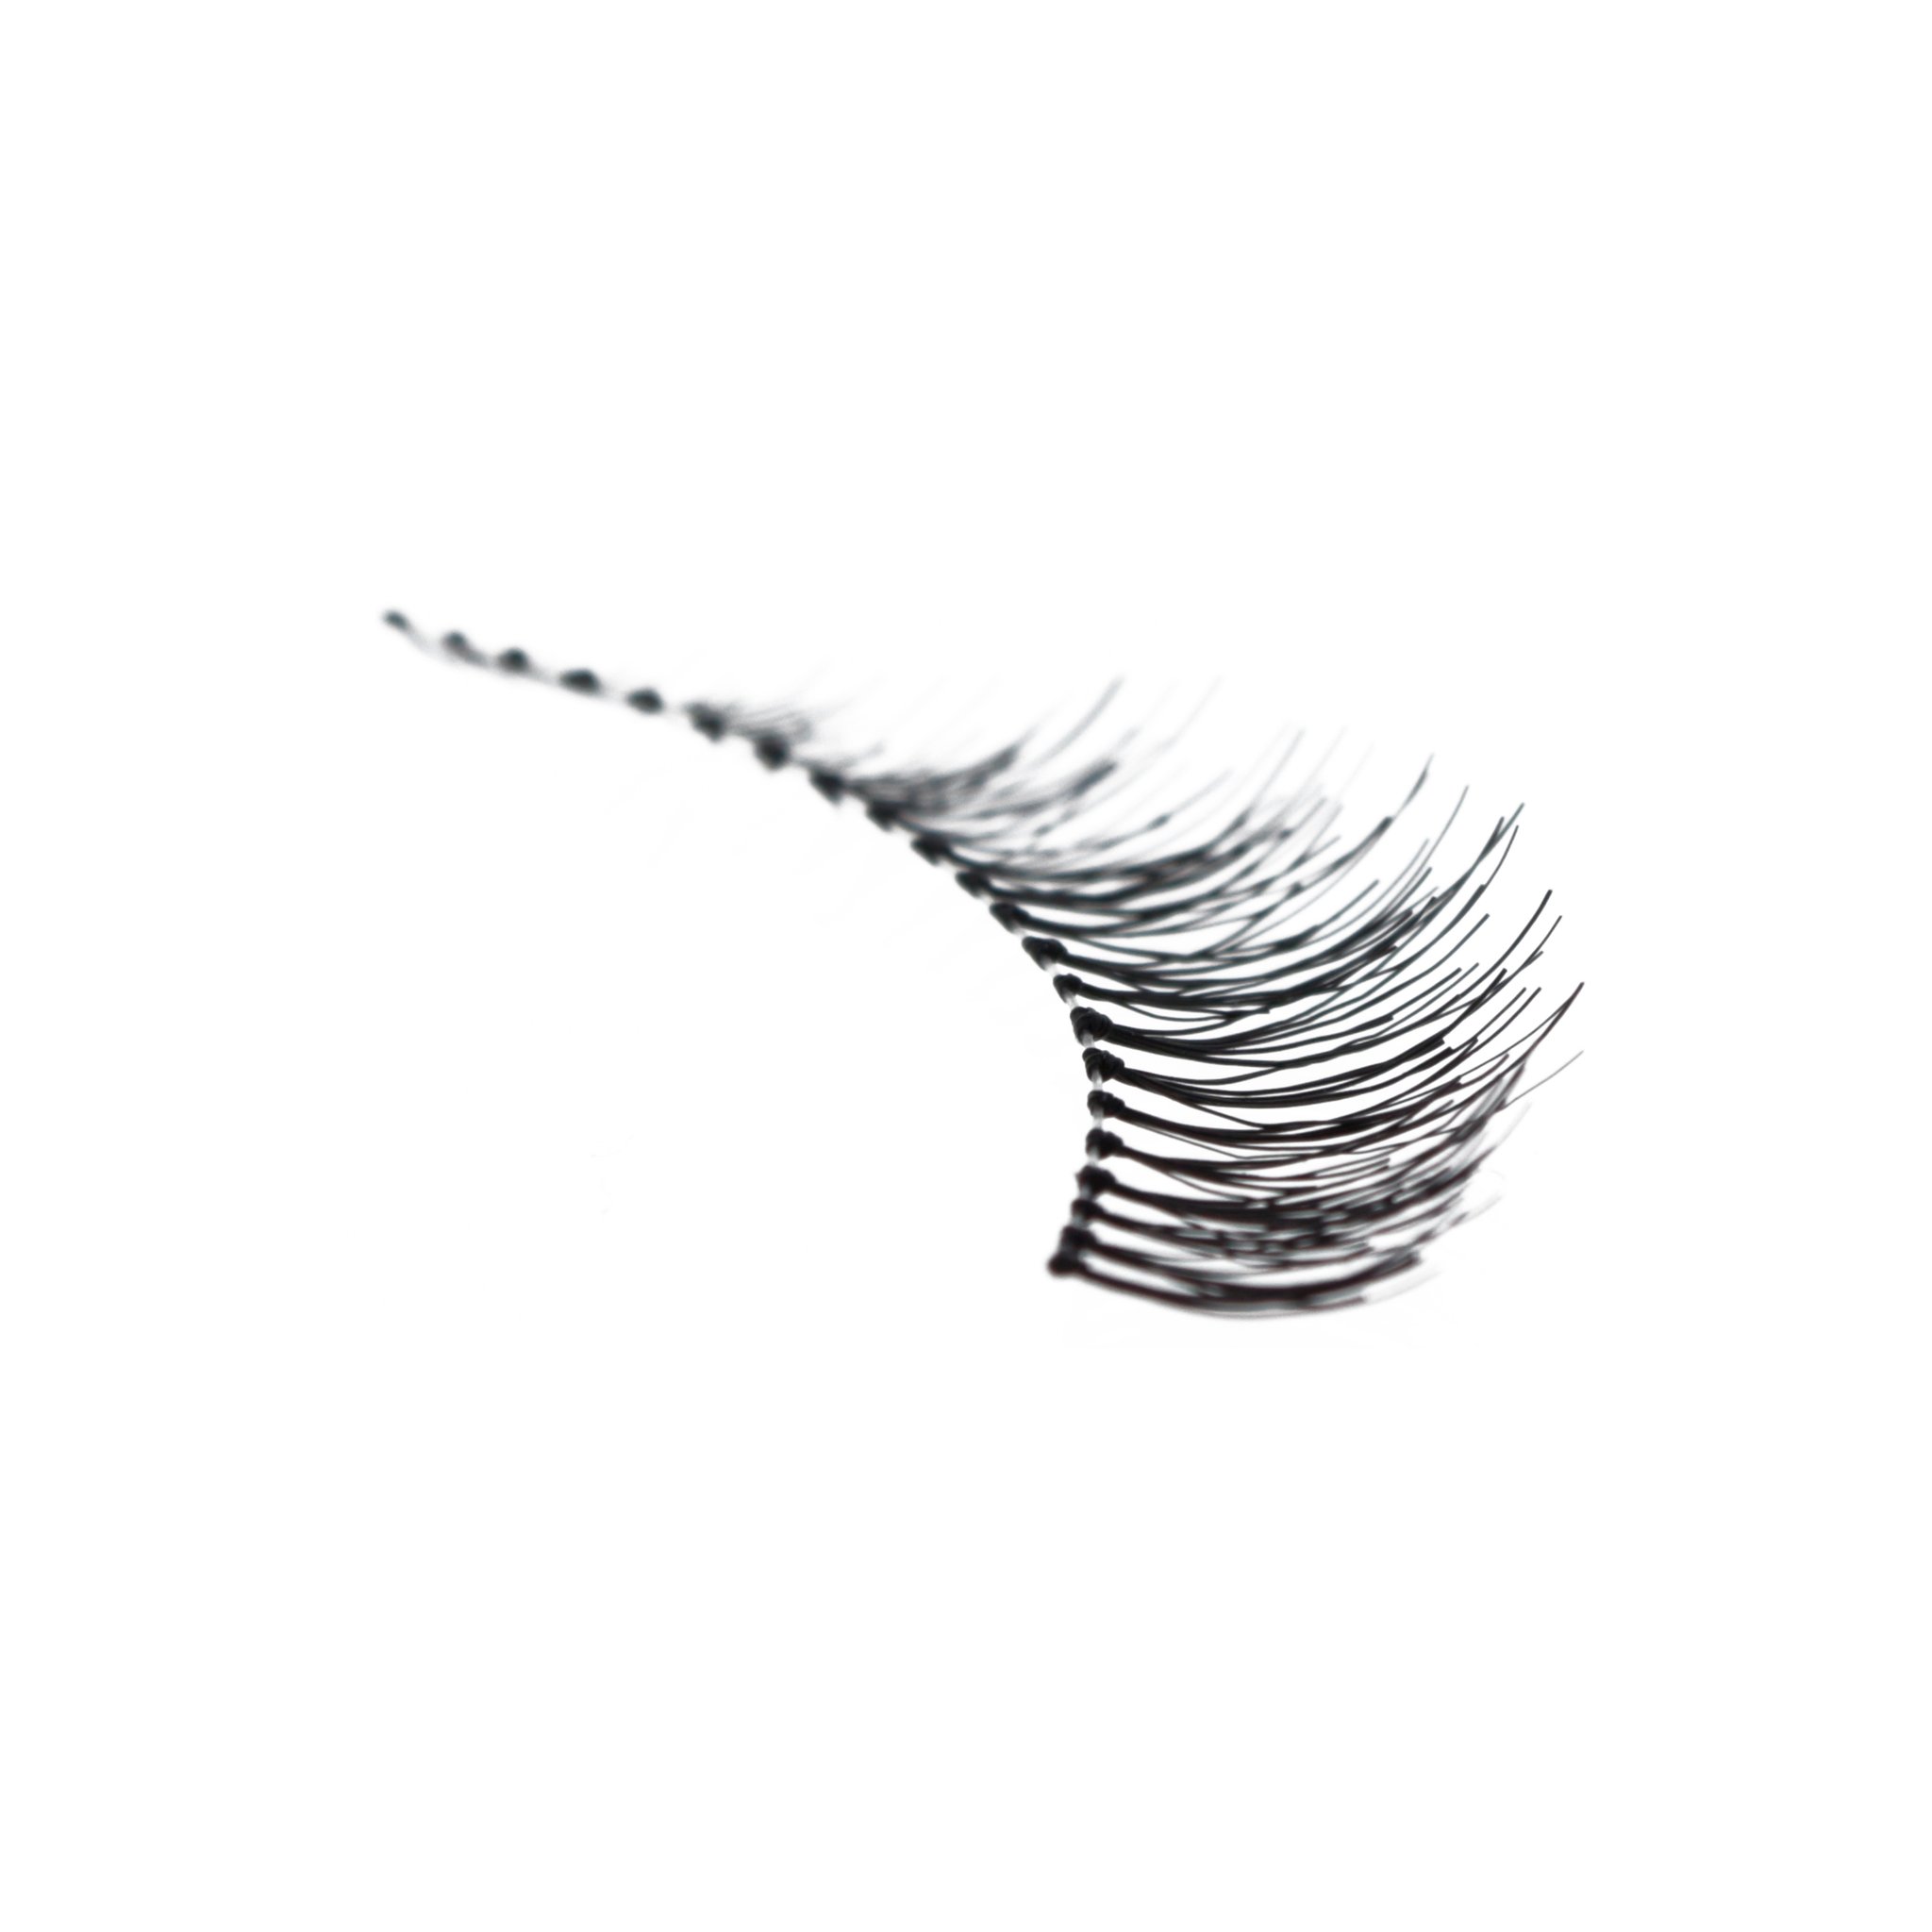 Collection of Eyelashes clipart | Free download best Eyelashes clipart